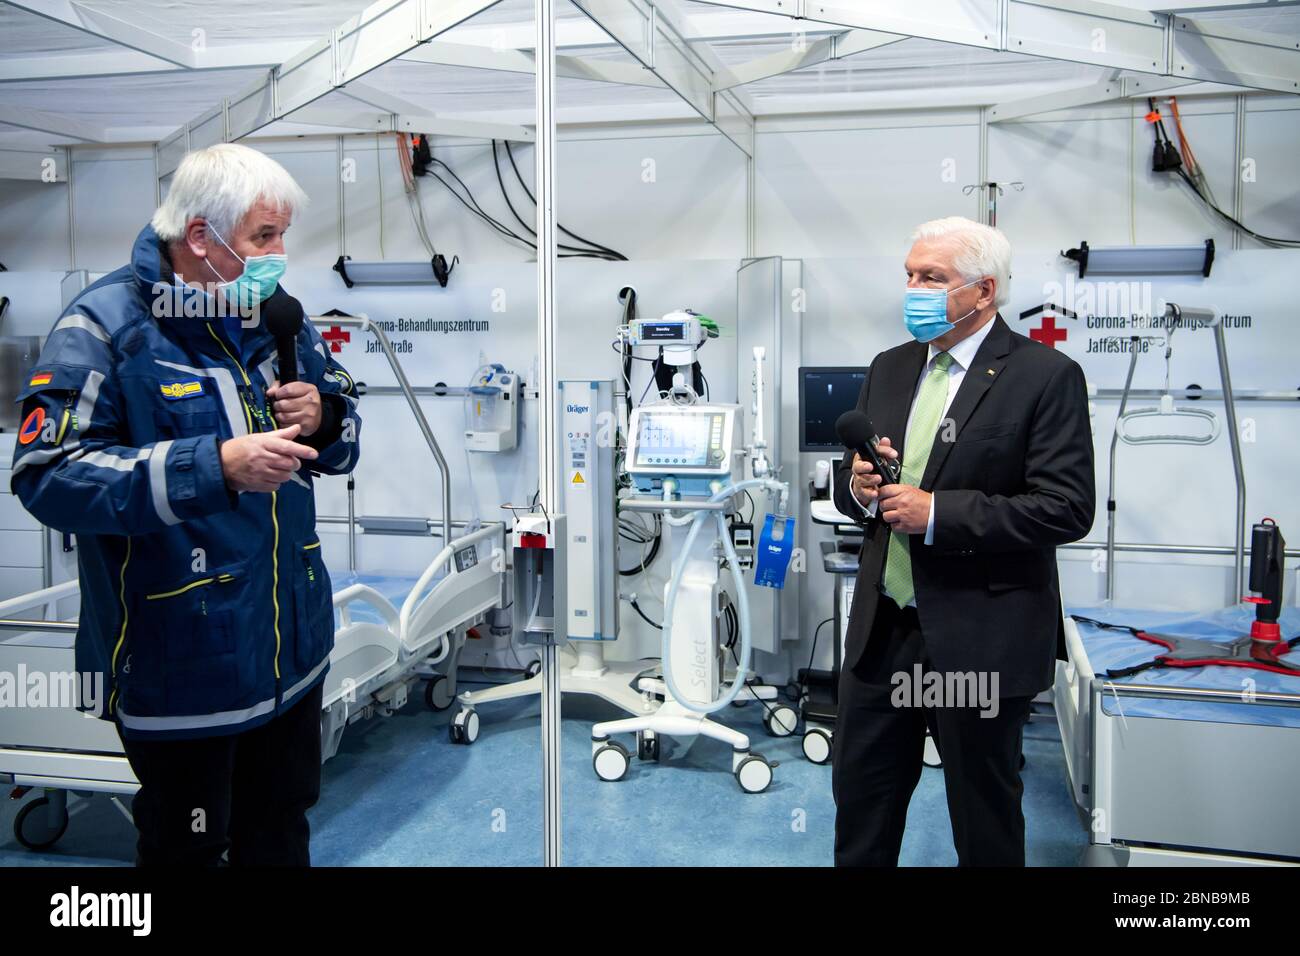 Berlin, Germany. 14th May, 2020. Federal President Frank-Walter Steinmeier (r) is guided through the temporary corona treatment centre on the Berlin Exhibition Grounds by Project Manager Albrecht Broemme. A corona reserve hospital has been built in Hall 26 within a few weeks. Initially, around 500 corona infected and Covid-19 patients could be isolated and treated there, should the Berlin clinics reach their limits. In total, up to 1000 reserve beds could be created there. The clinic is currently in a standby mode, with staff on call. Credit: Bernd von Jutrczenka/dpa Pool/dpa/Alamy Live News Stock Photo